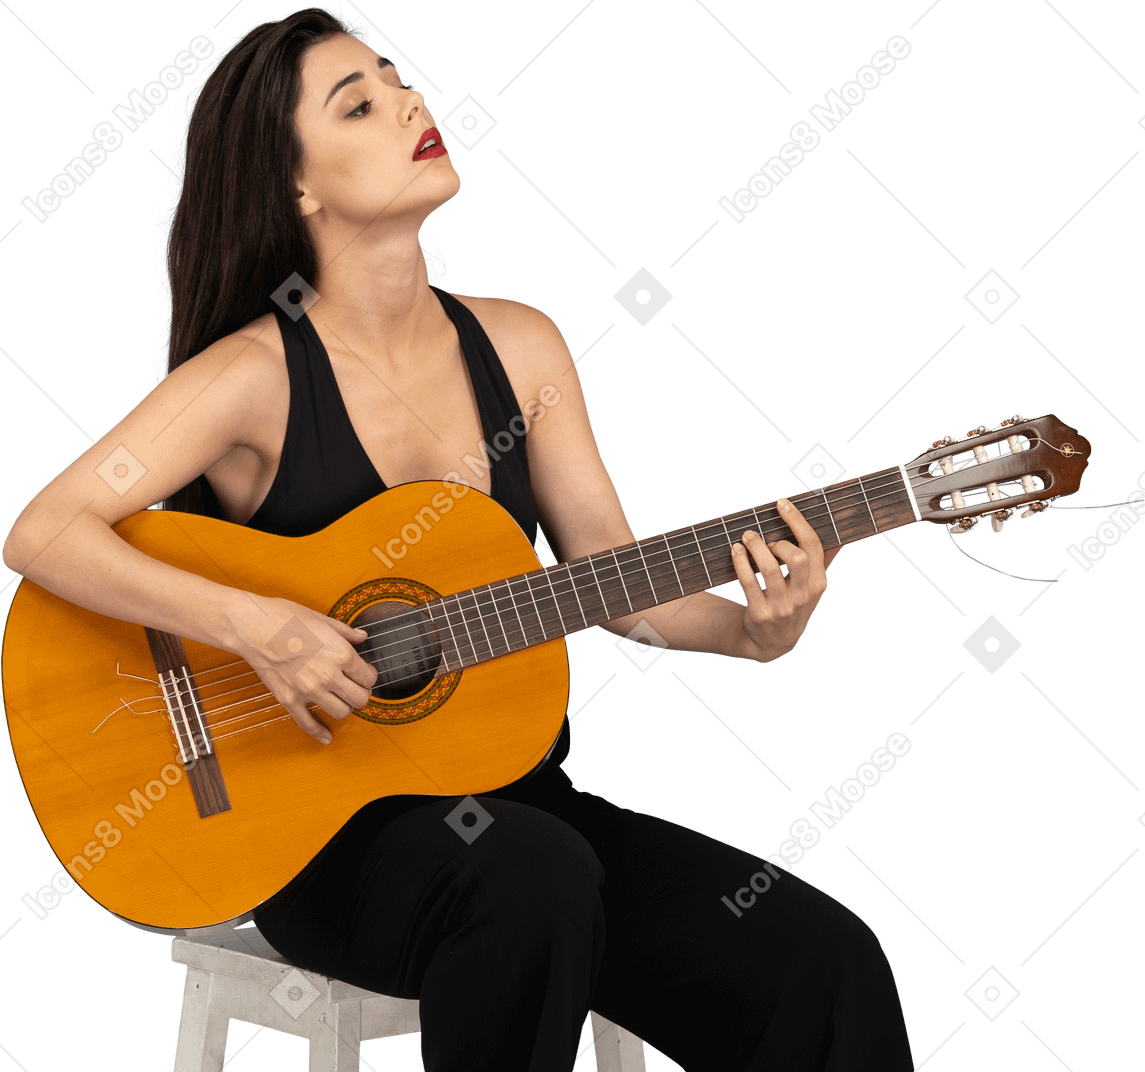 Three-quarter view of a sitting young lady in black suit holding the guitar and raising head